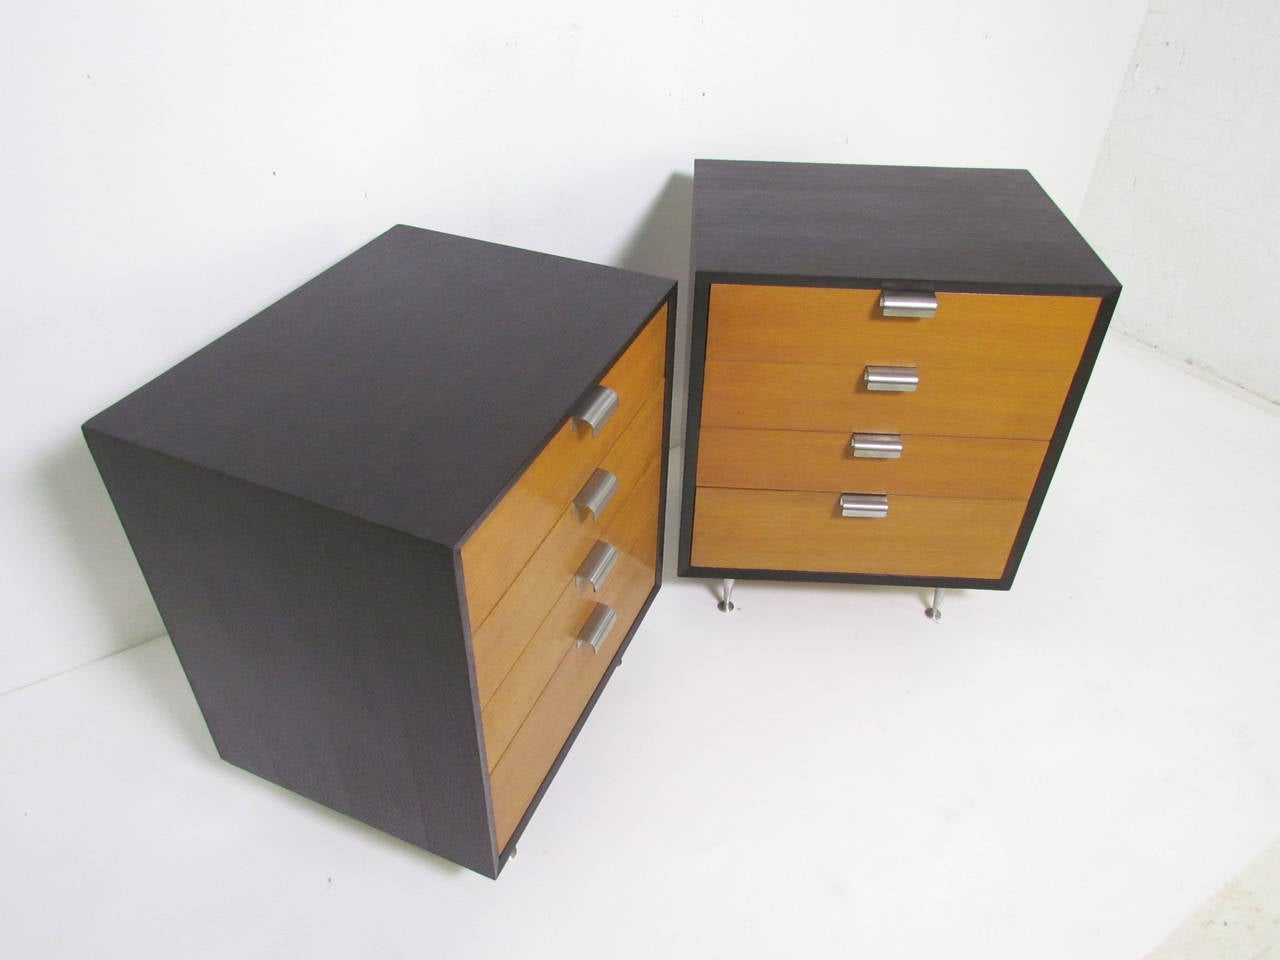 Cast Pair of George Nelson Nightstands or Chests for Herman Miller